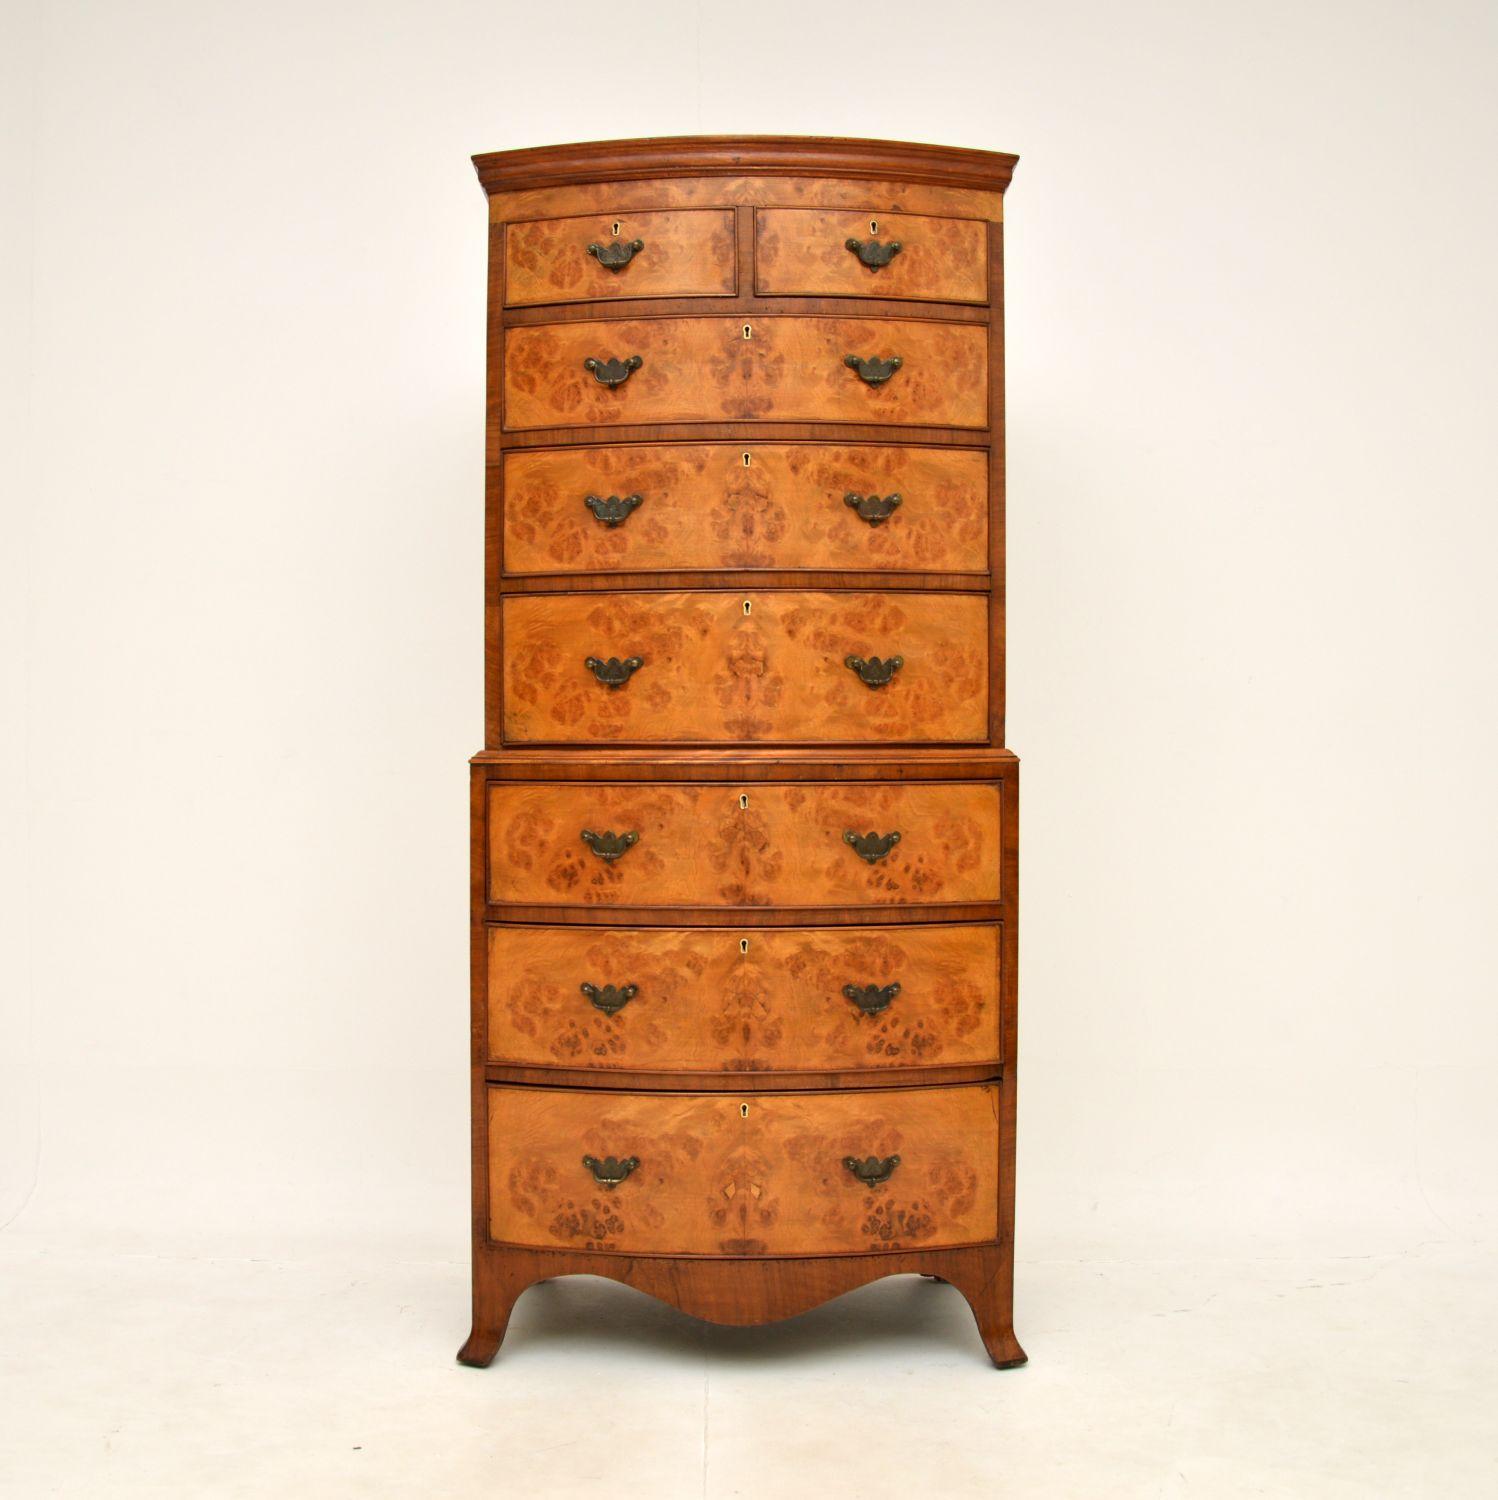 A smart and extremely well made antique burr walnut chest on chest of drawers. This was made in England, it dates from around the 1890-1910 period.

It is of superb quality and is a great size, with lots of storage space. The burr walnut grain